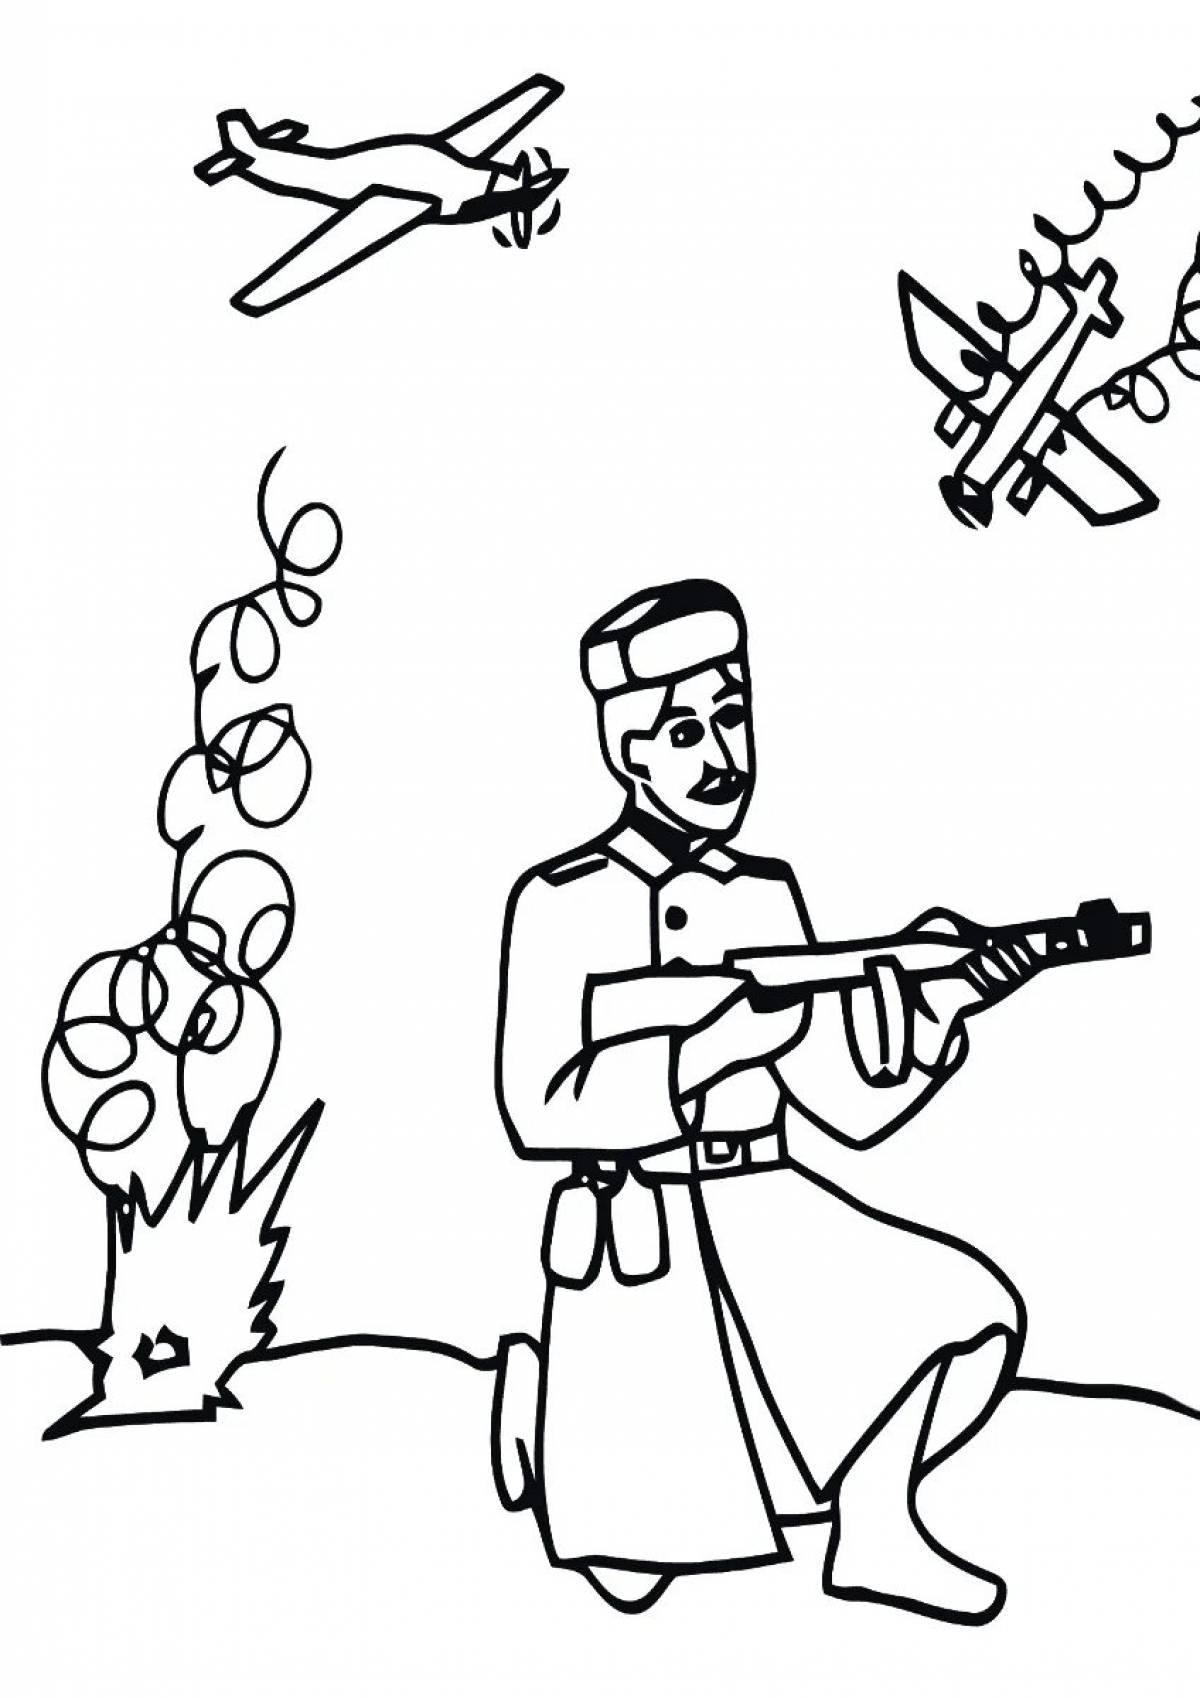 Coloring page determined soldier hero